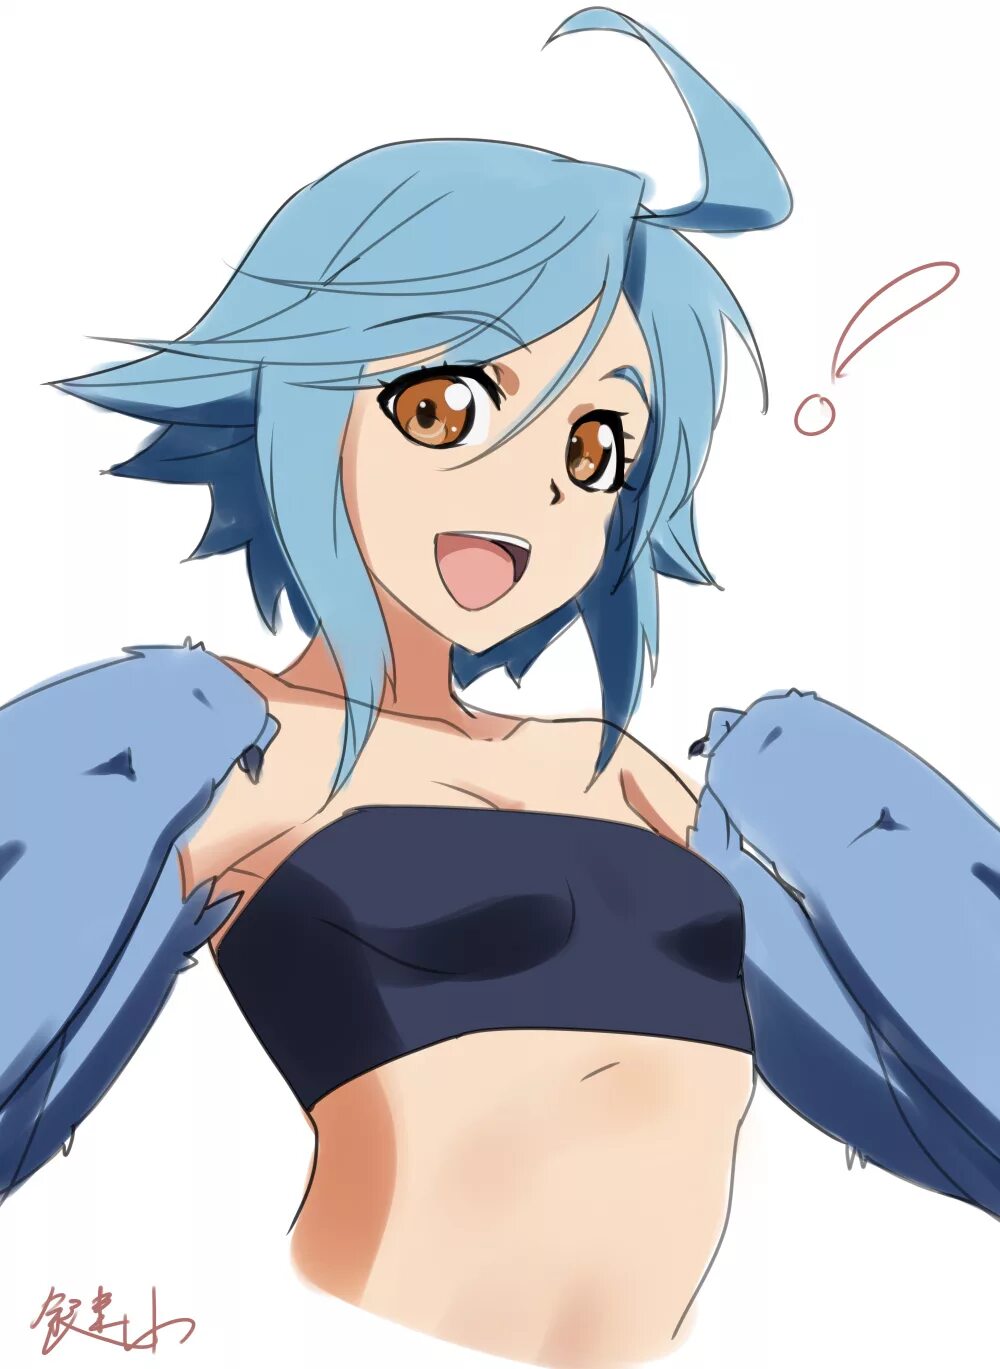 Папи Monster Musume. Musume Monster Паппи. Папи папи герл